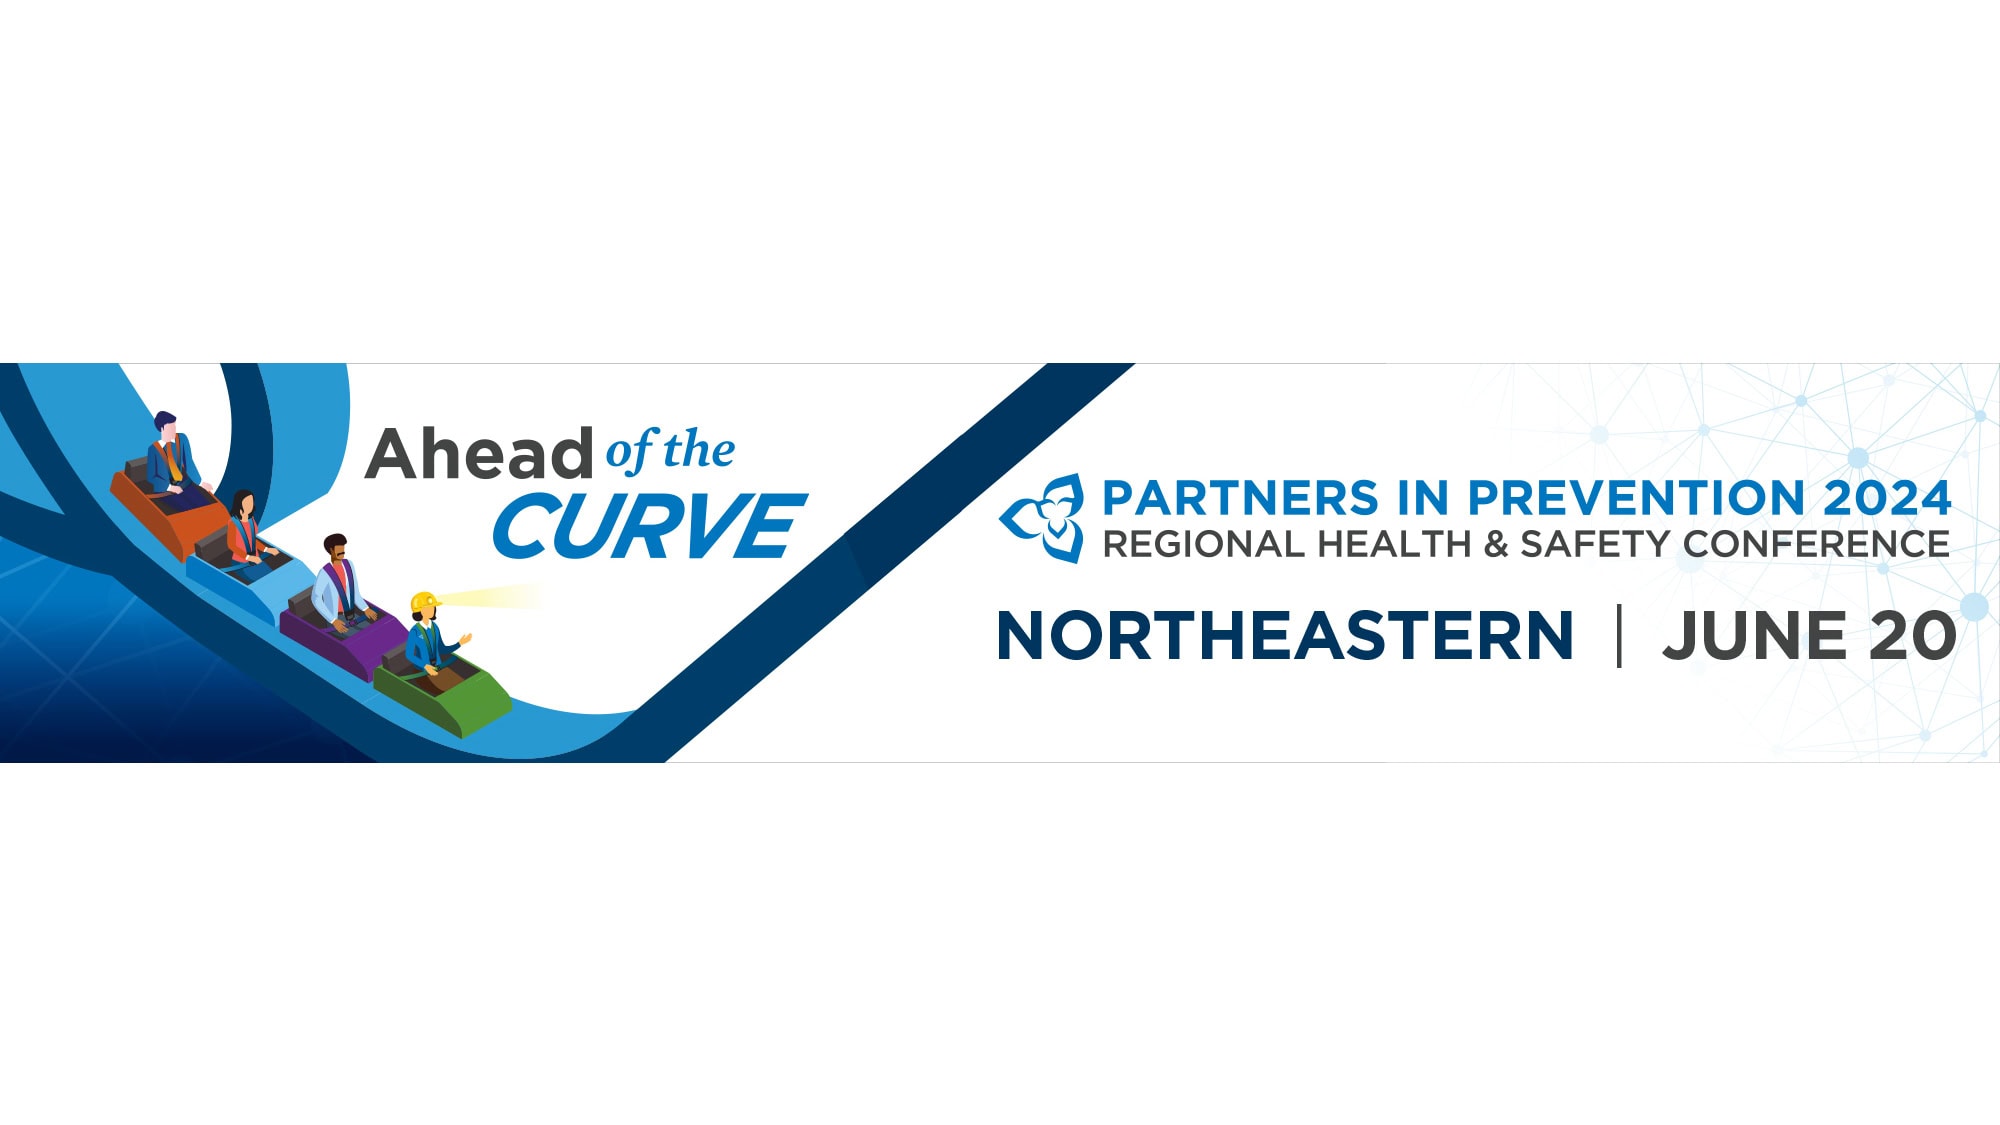 Text that reads "Ahead of the Curve. Partners in Prevention 2024 Regional Health & Safety Conference Northeastern June 20"